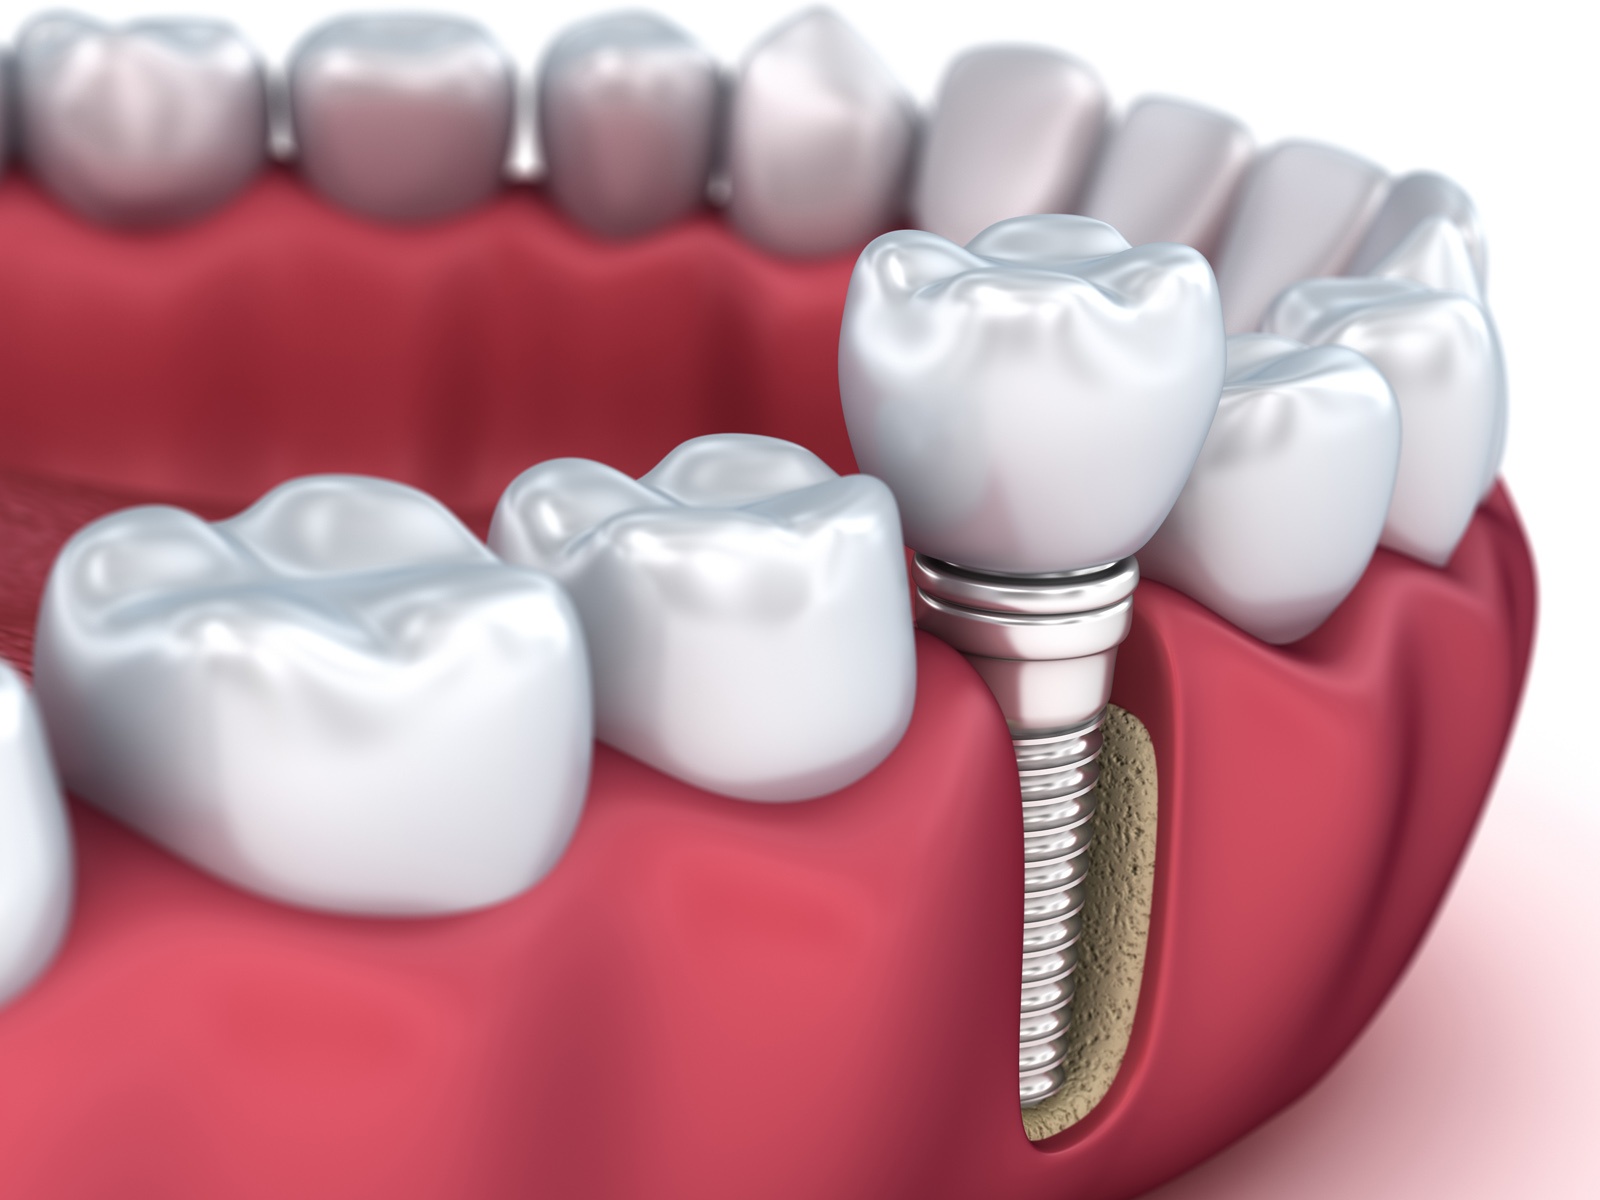 How to Replace Damaged Teeth with Dental Implants